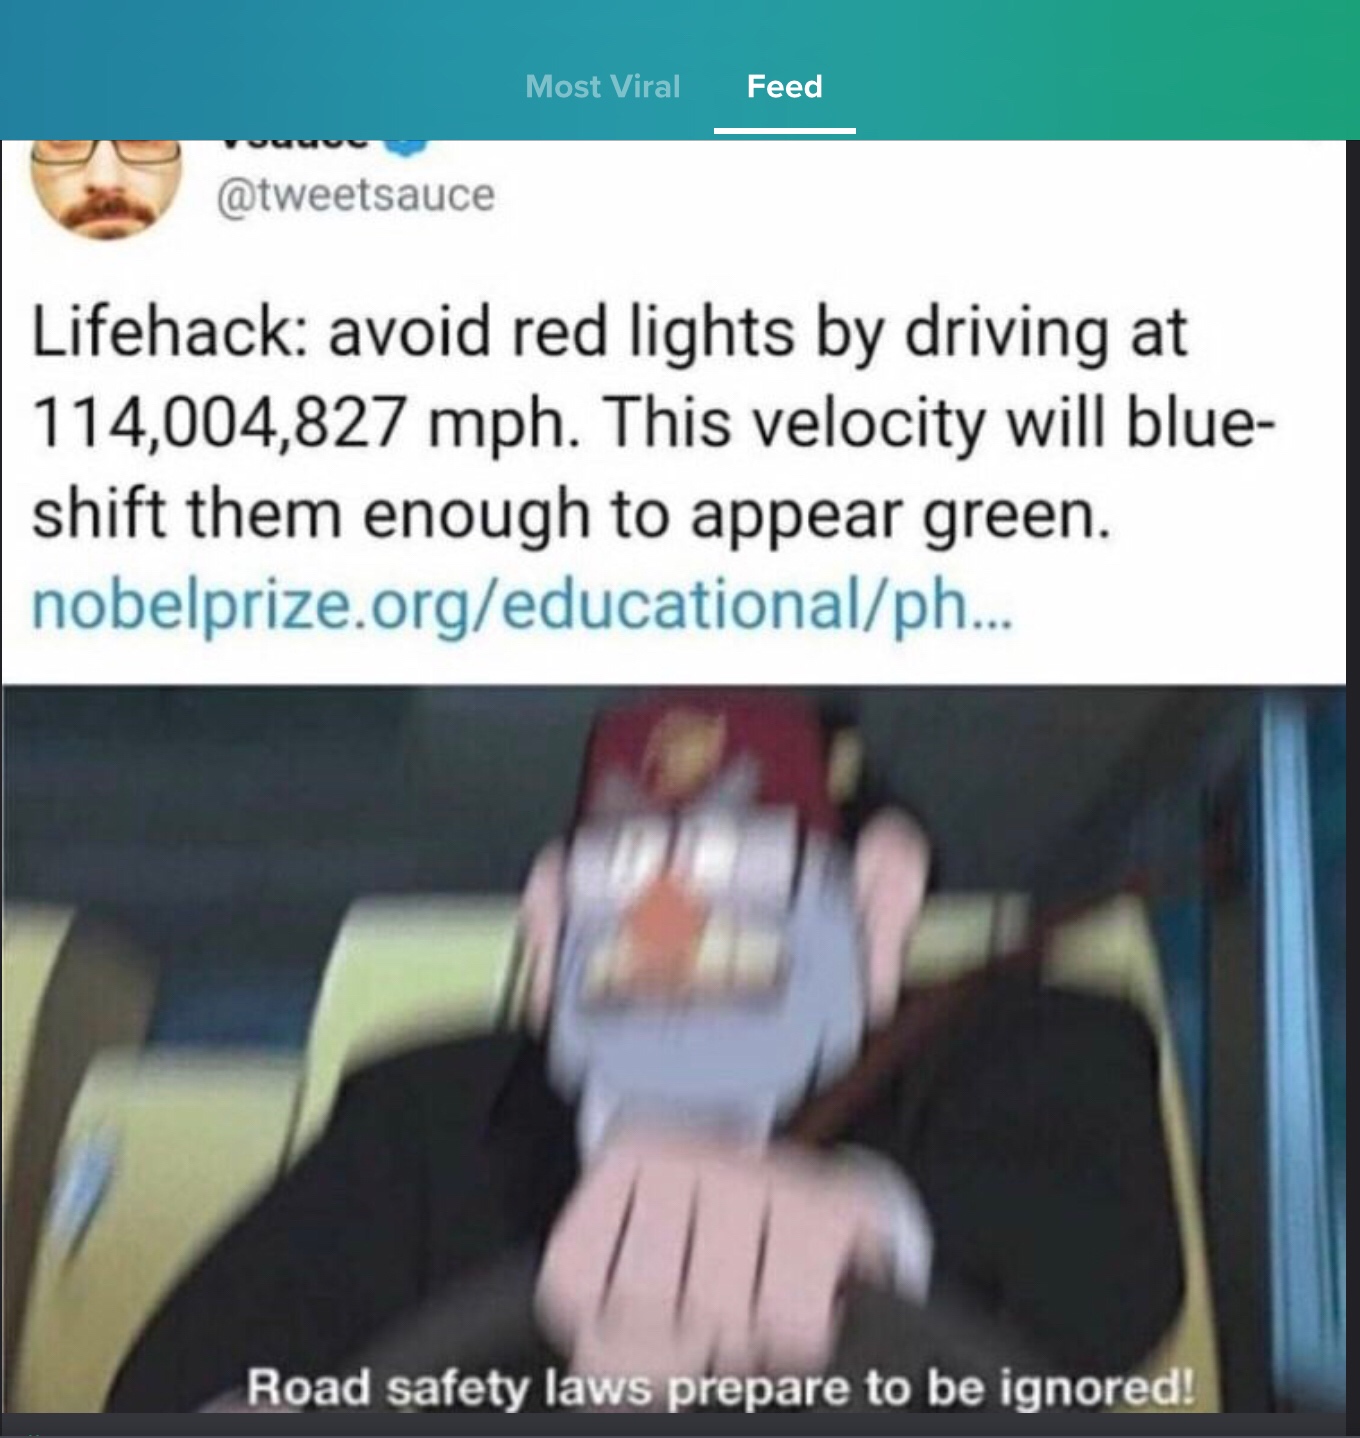 vsauce memes - Most Viral Feed Lifehack avoid red lights by driving at 114,004,827 mph. This velocity will blue shift them enough to appear green. nobelprize.orgeducationalph... Road safety laws prepare to be ignored!